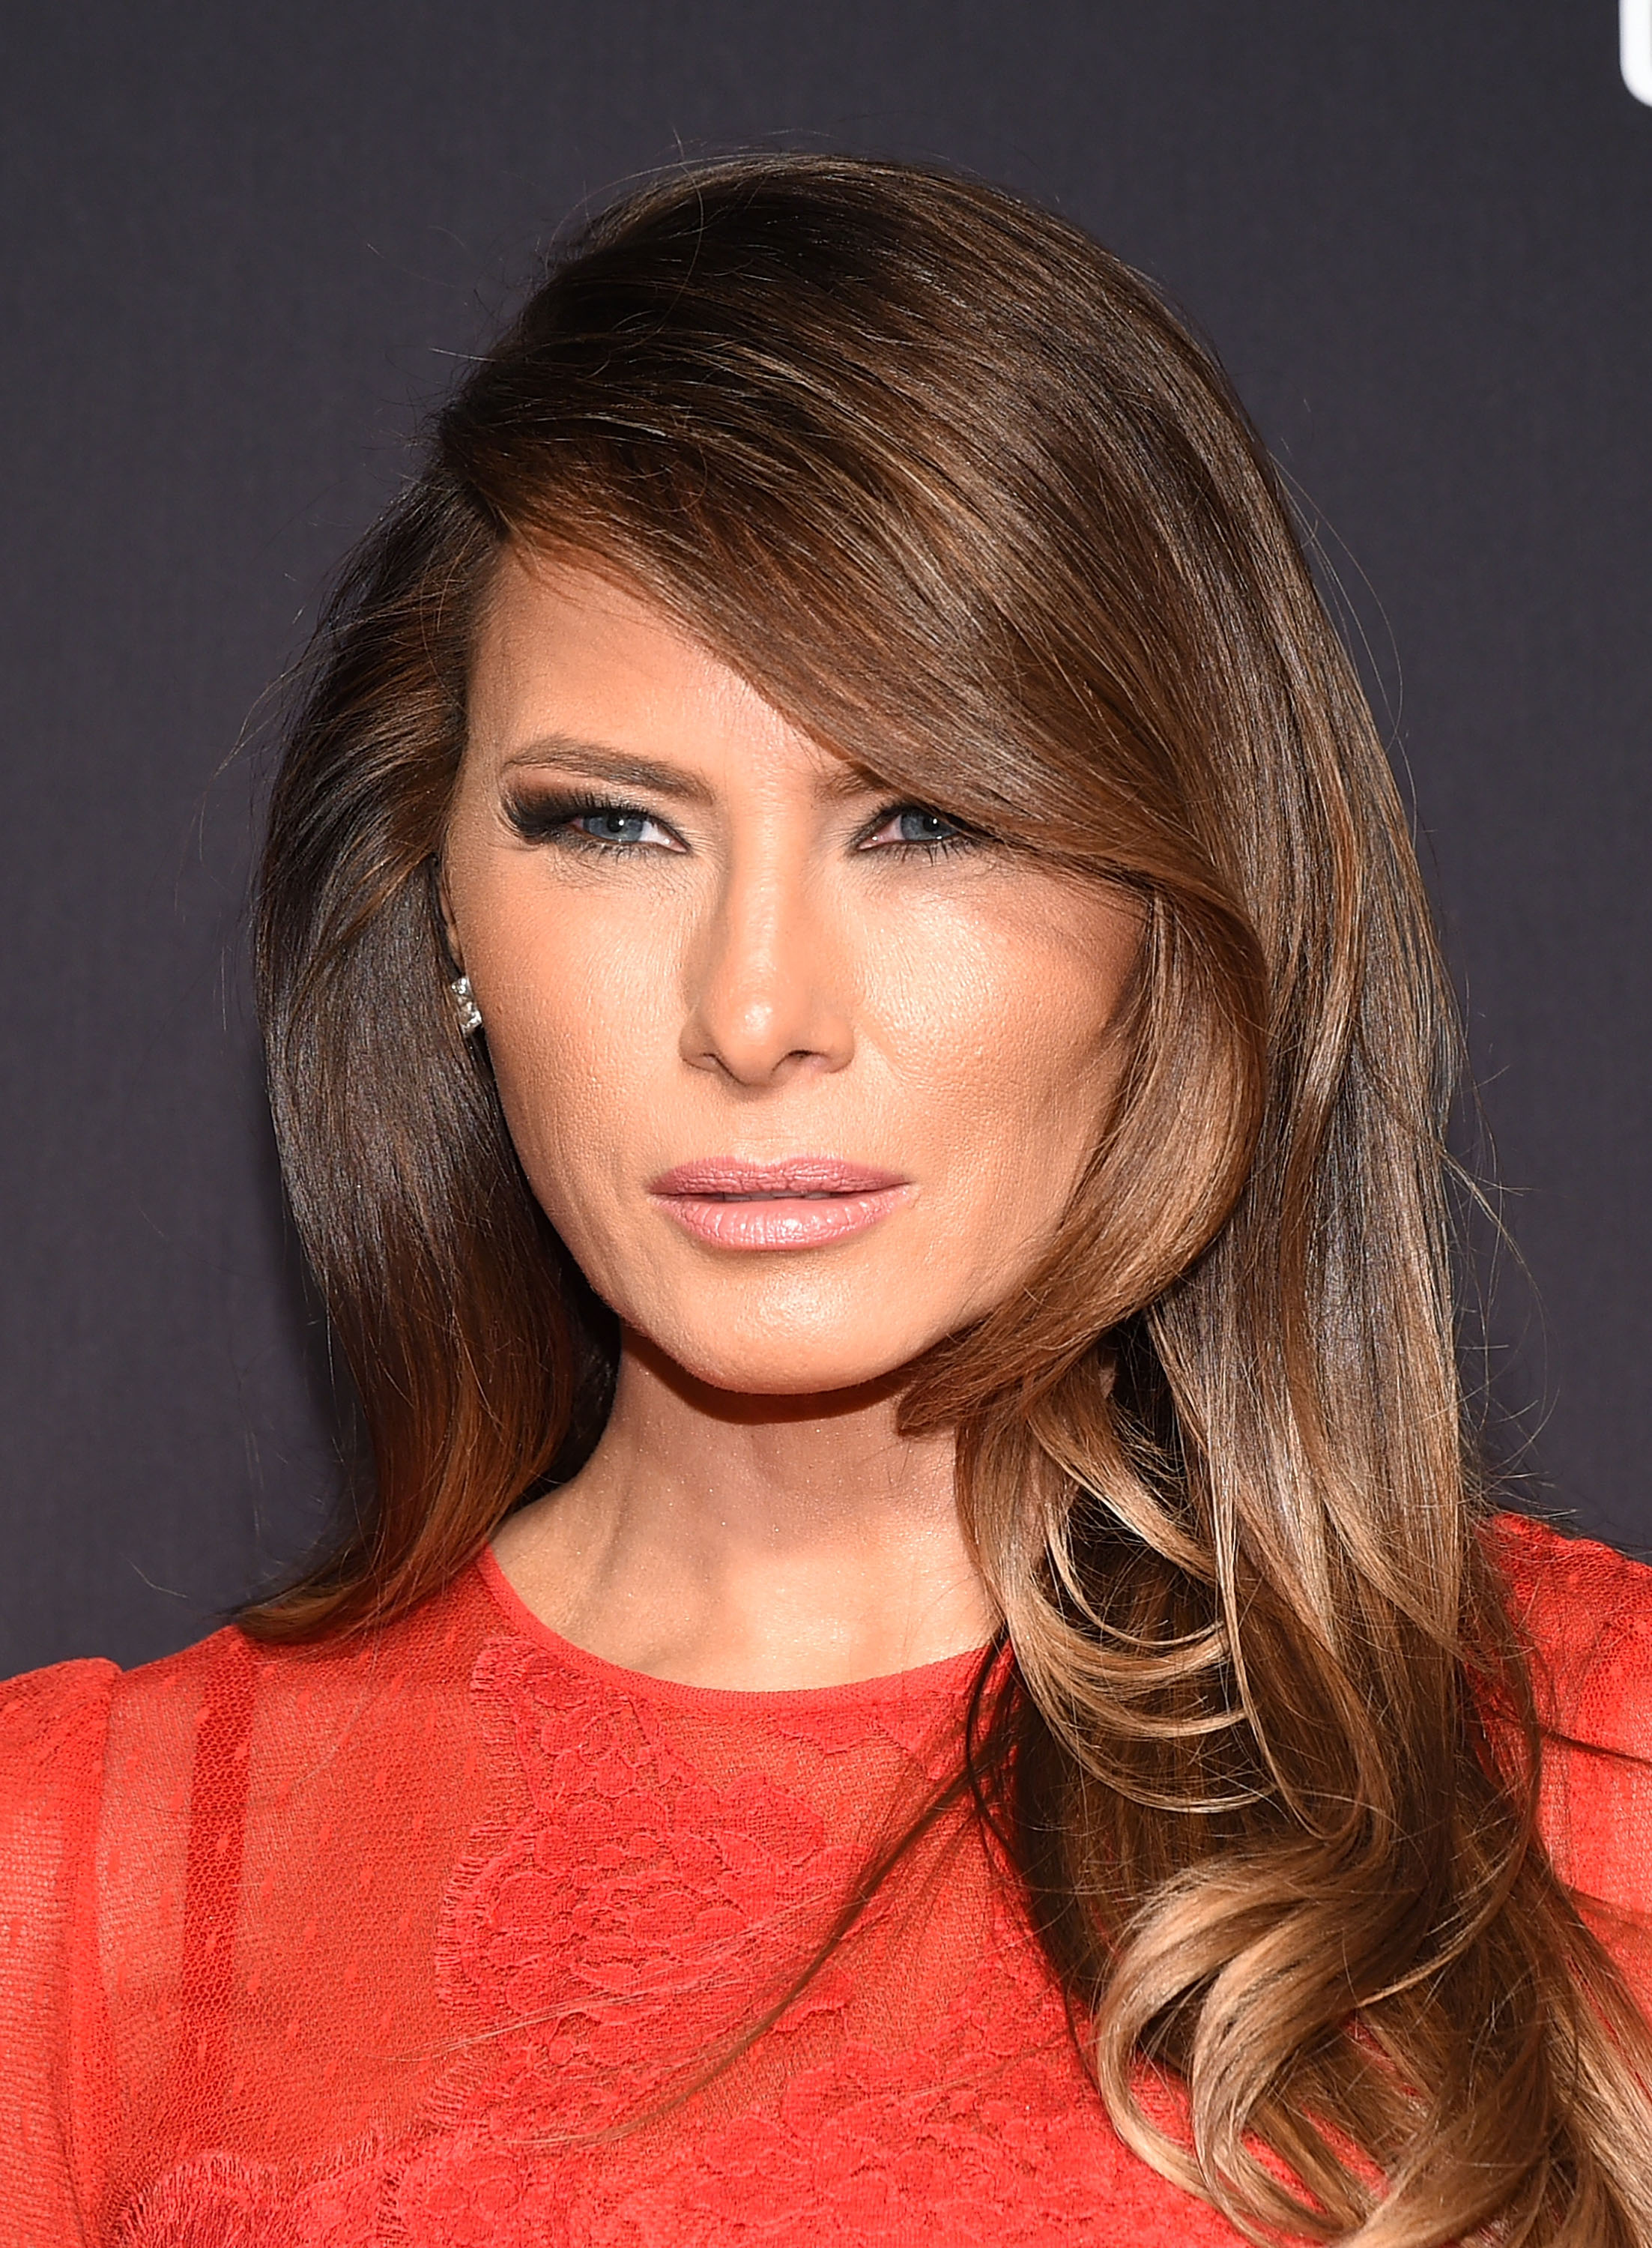 Melania Trump at the 2015 New York Spring Spectacular Opening Night in New York City on March 26, 2015.